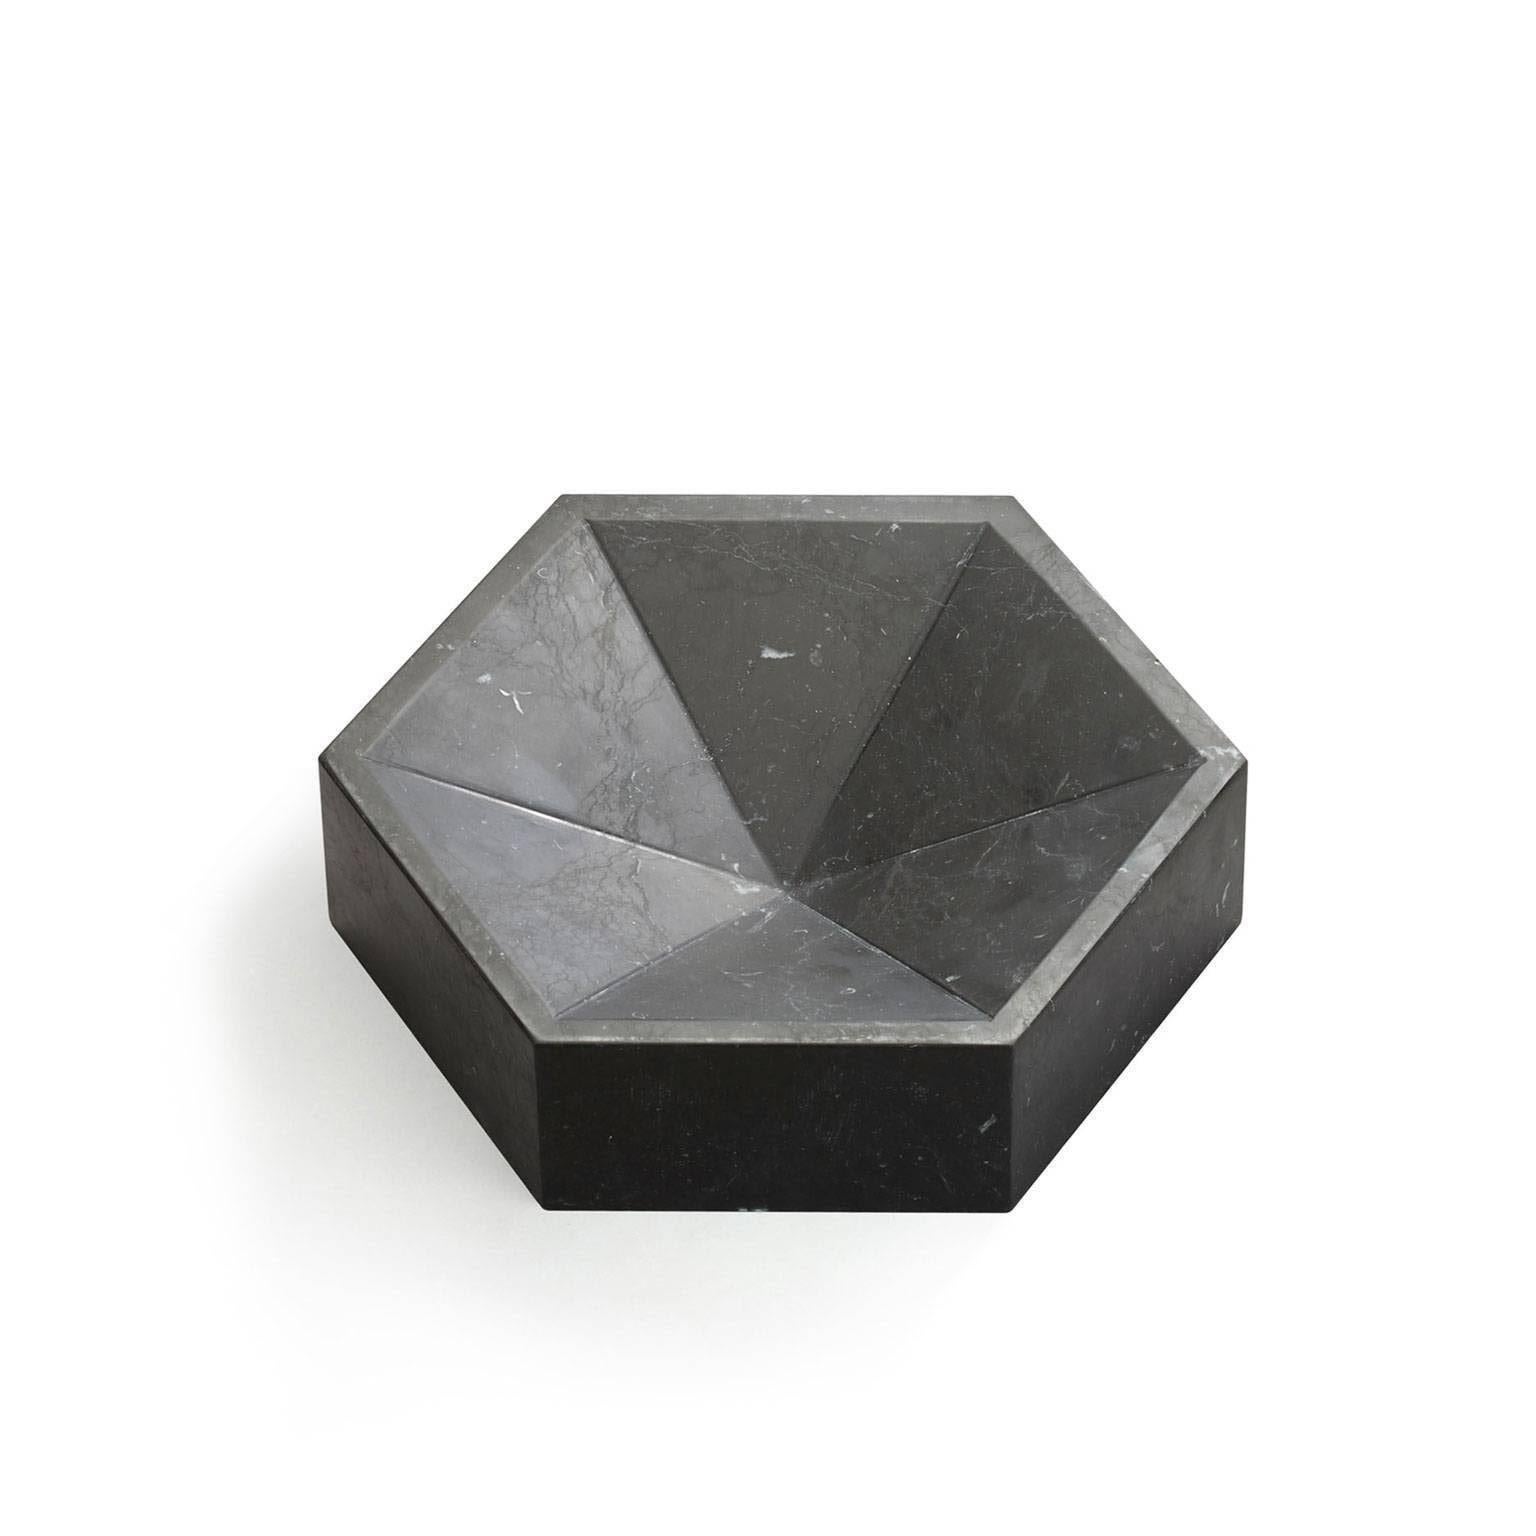 The hexagonal bowls are part of Lunar collection which is designed by Lara Bohinc. The hexagonal bowls are designed so that they can be laid together forming a honeycomb formation, either in same color or in different color combinations. They are